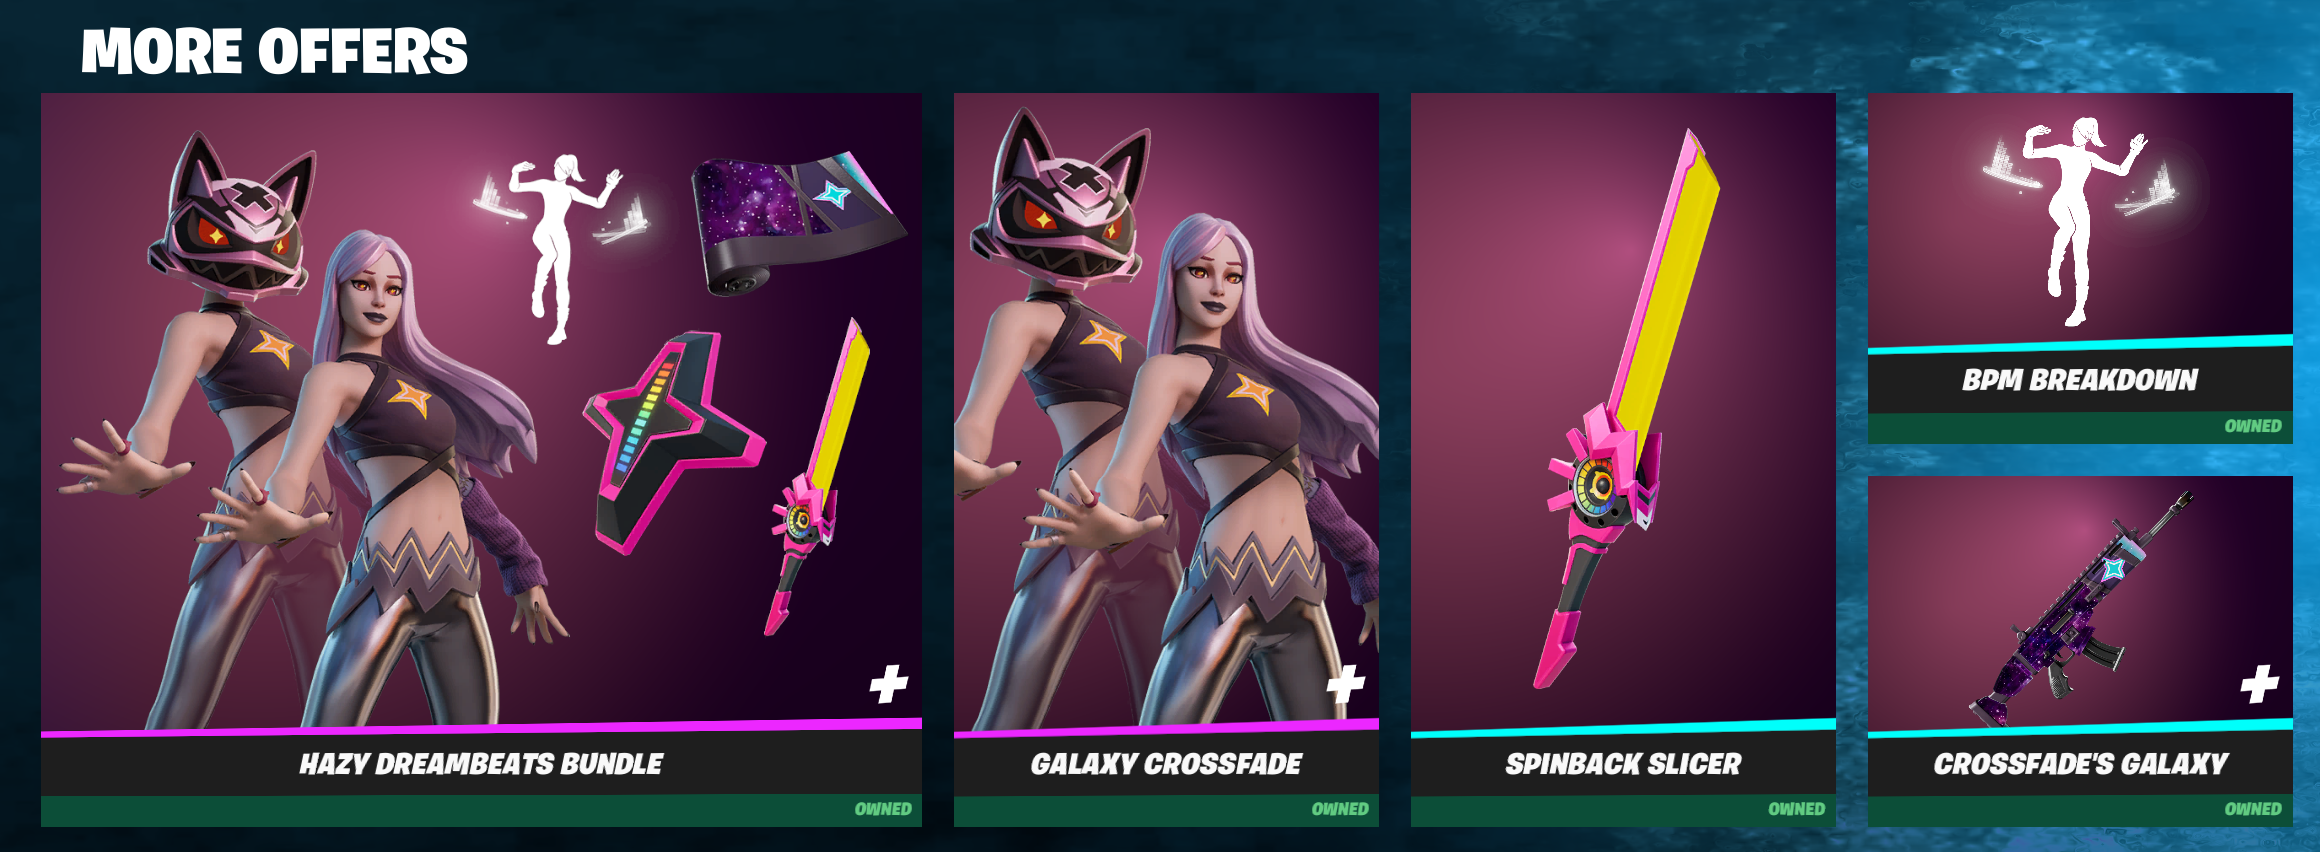 New Galaxy Crossfade Outfit Available Now